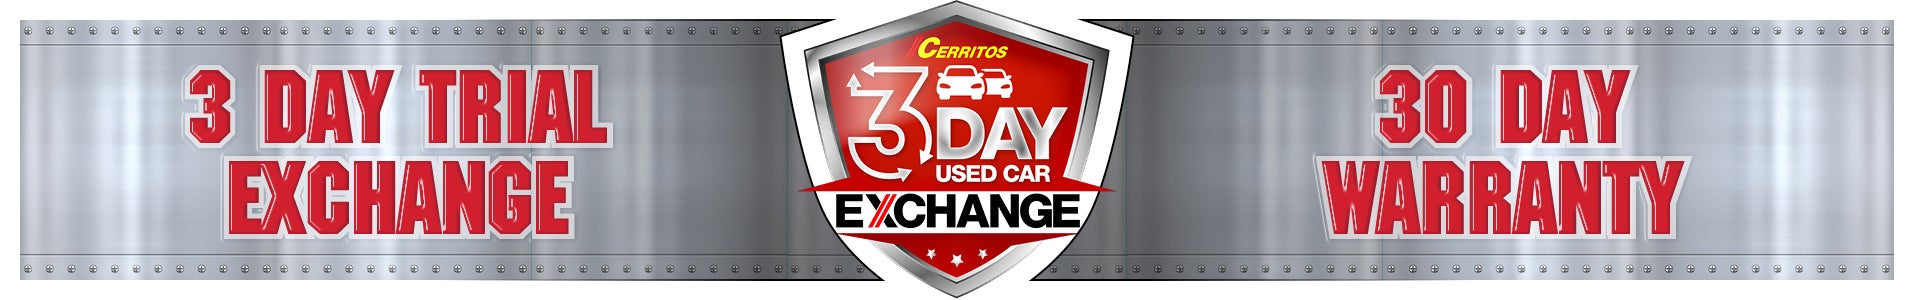 Buy a Used car with Confidence with the 3 day exchange and 30 warranty